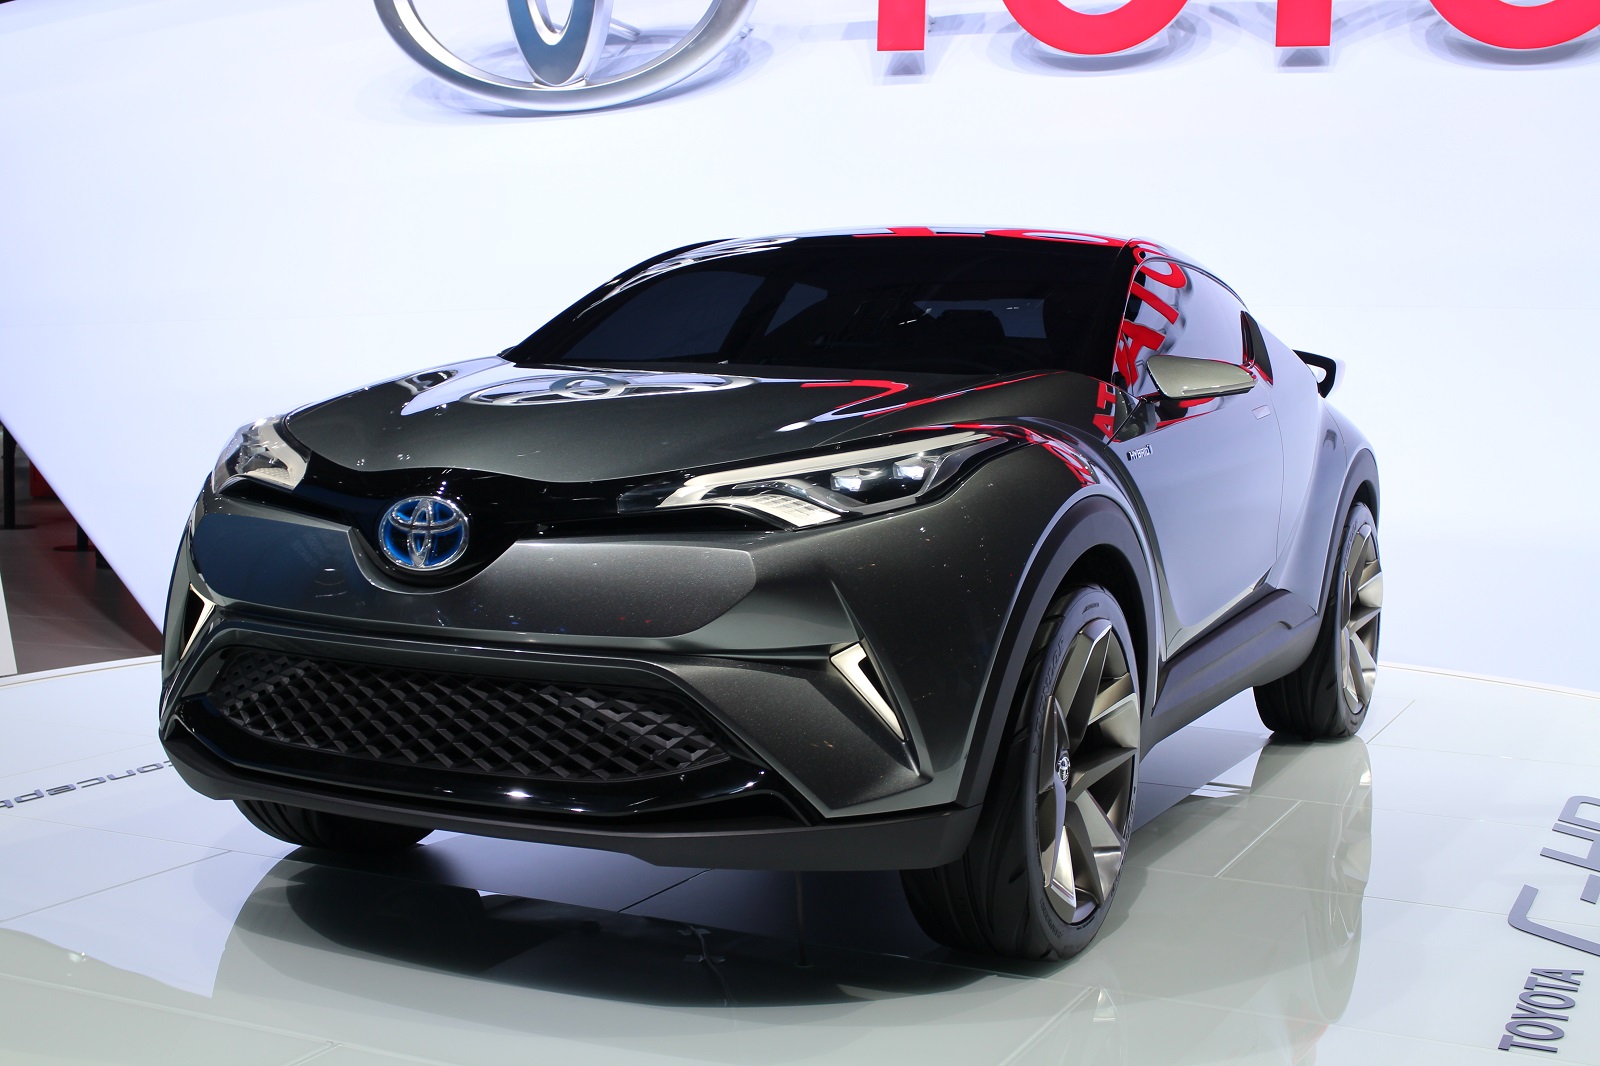 2020 Toyota C-HR - Stylish Compact Crossover - YouTube